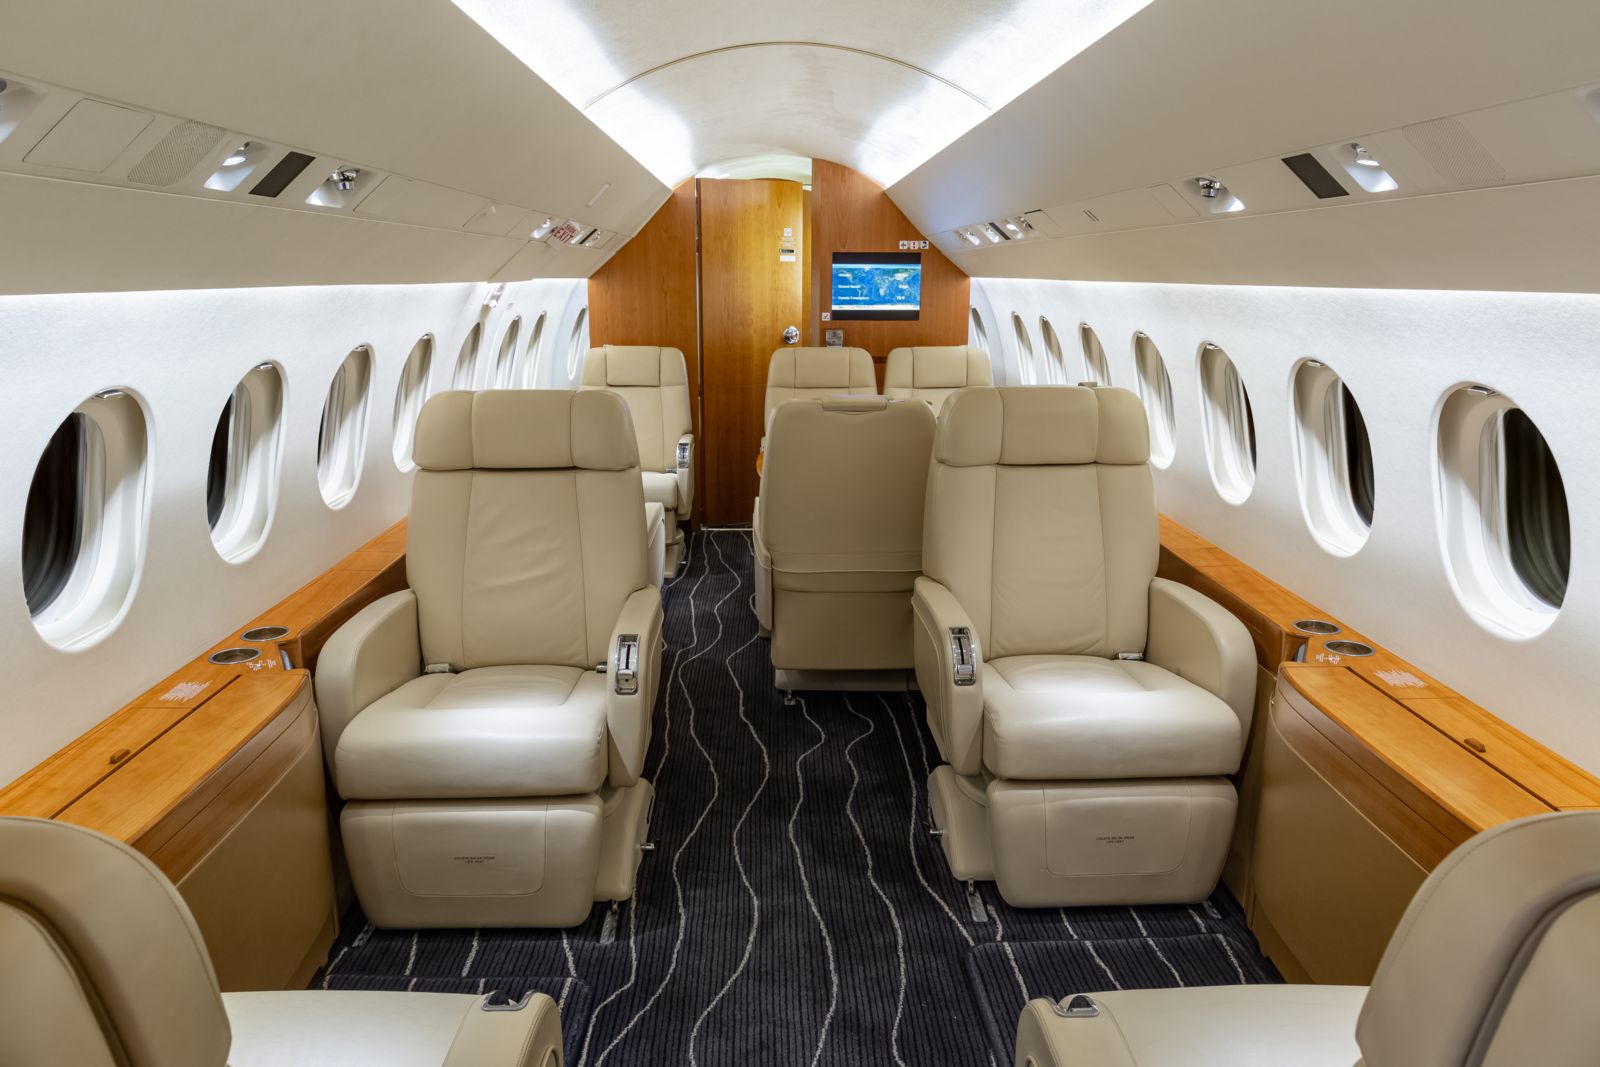 Dassault Falcon 2000LX  S/N 202 for sale | gallery image: /userfiles/files/bfp_3868.jpg